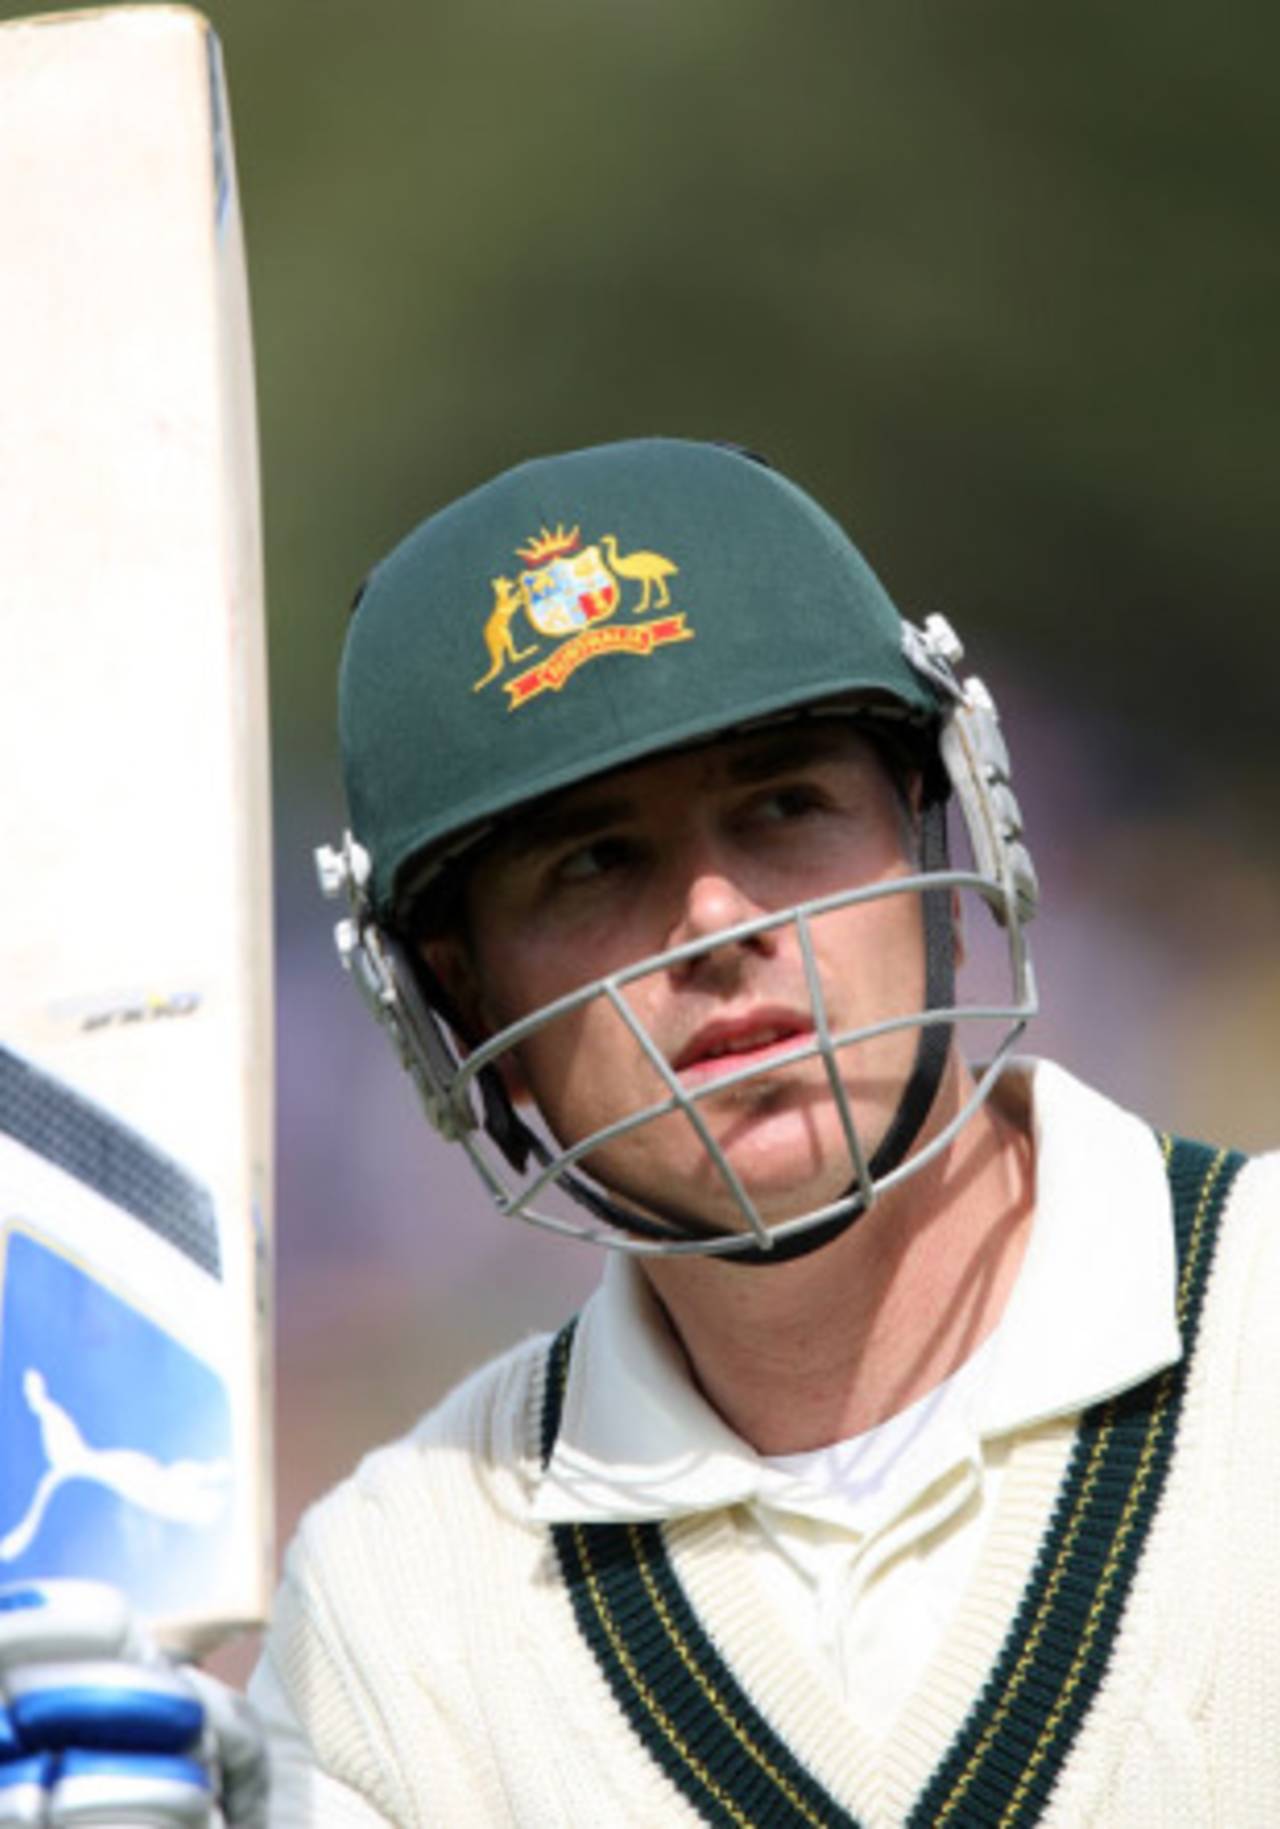 The only time Marcus North showed any signs of frustration was when Ricky Ponting declared&nbsp;&nbsp;&bull;&nbsp;&nbsp;Getty Images